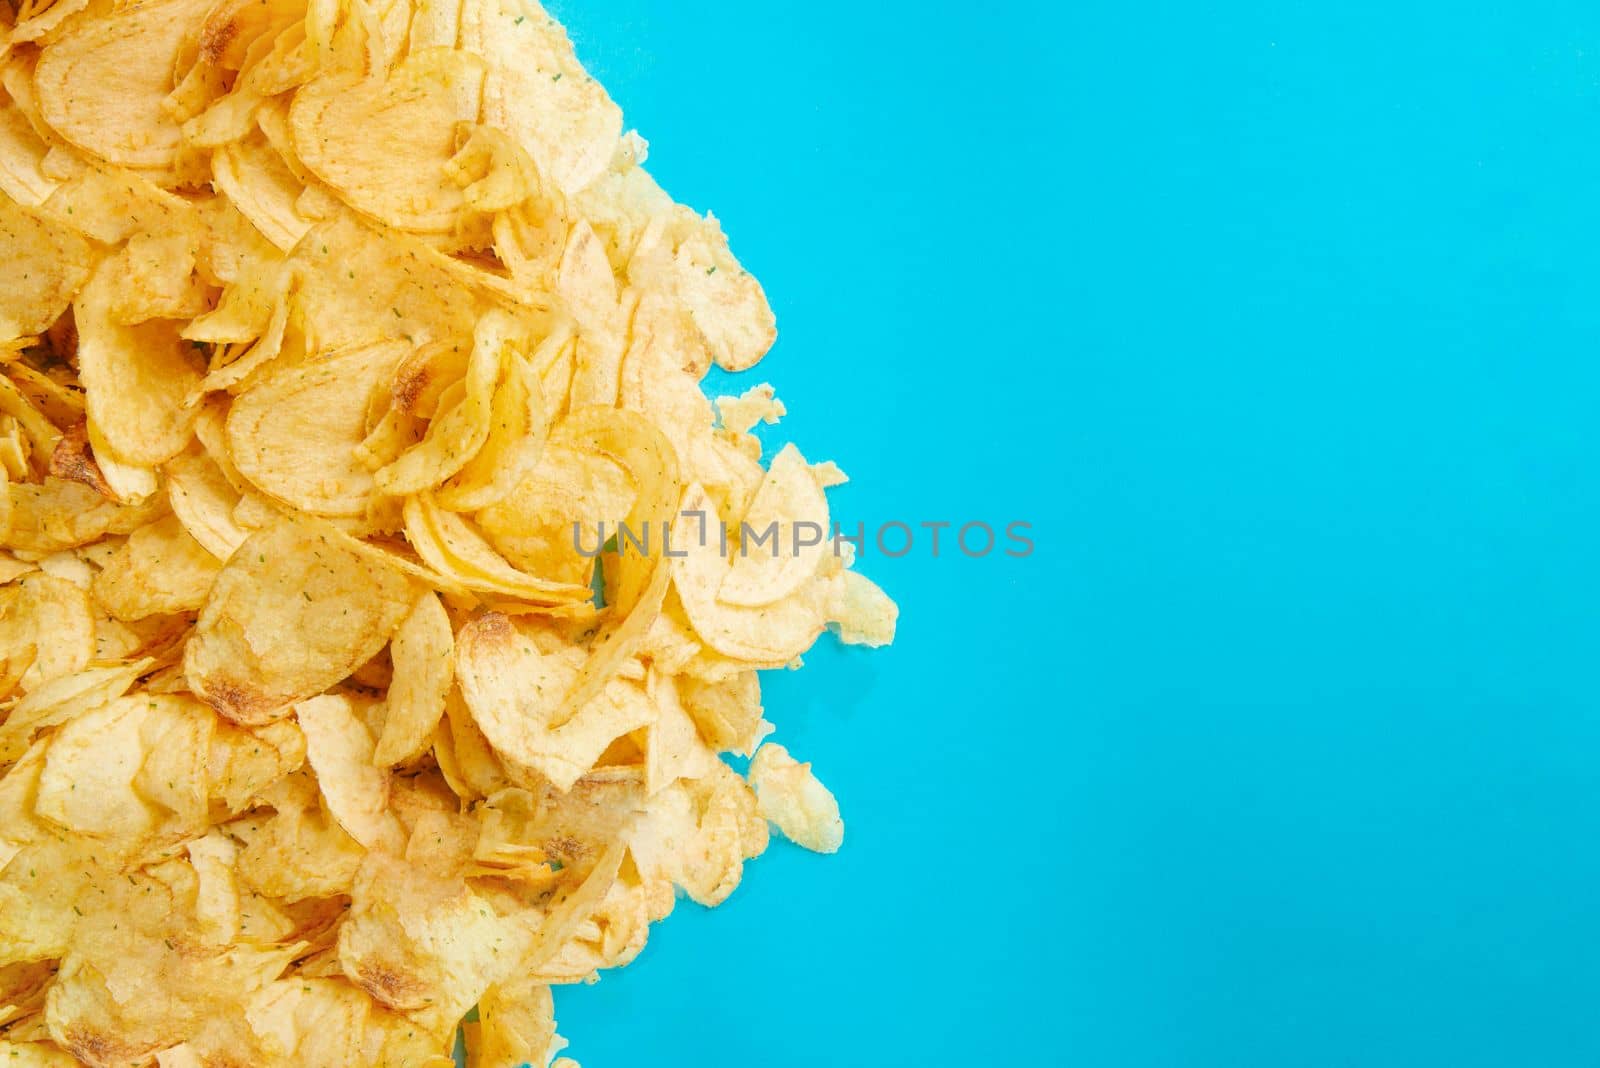 Fried foods are bad for your health. Healthy Eating. Chips, fried potatoes. Unhealthy foods. Blank space for text. Harmful food. Fried potatoes and chips on a blue background. Fried food is bad for your health